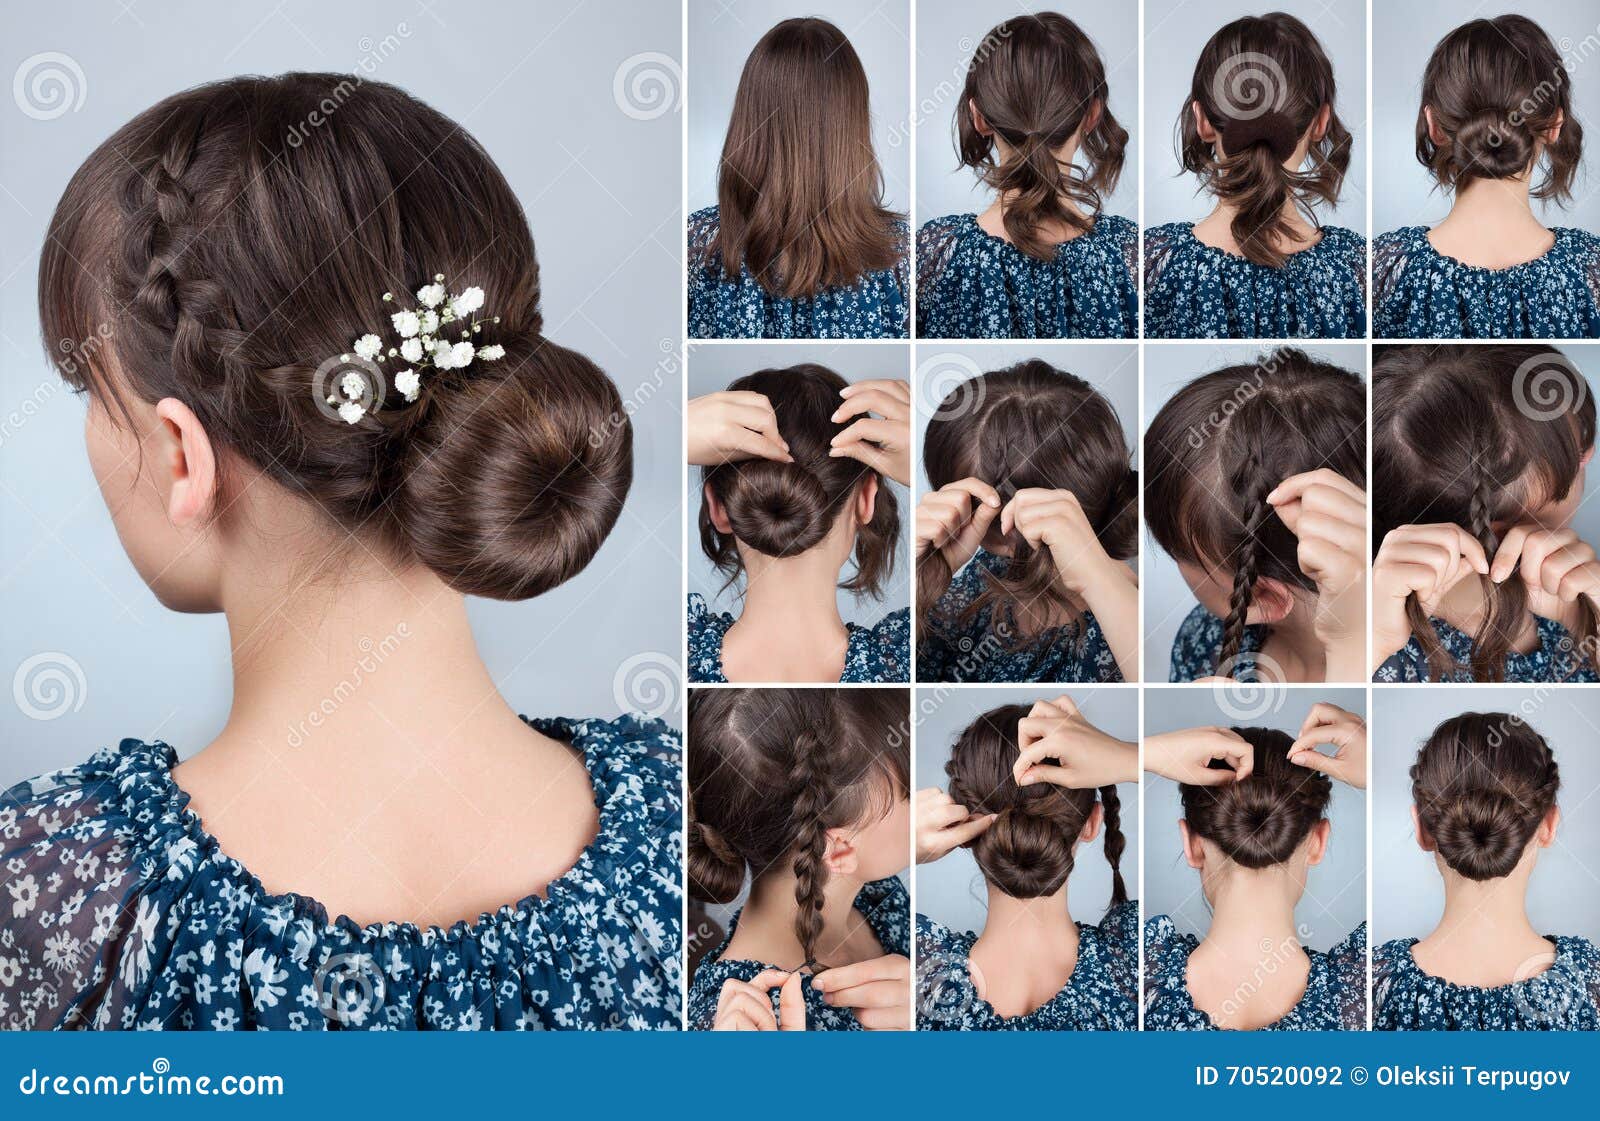 6 Romantic Hairstyles Perfect for Date Night - HerStyler